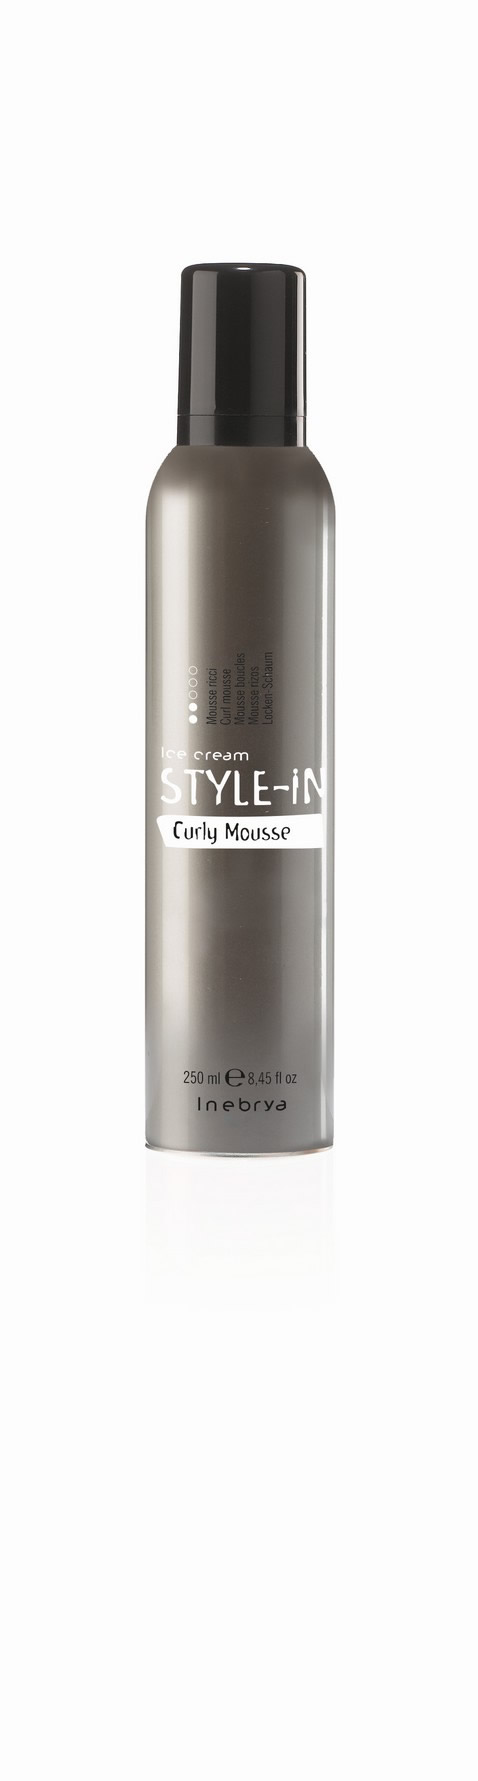 MOUSSE CURLY STYLE-IN 250 ML